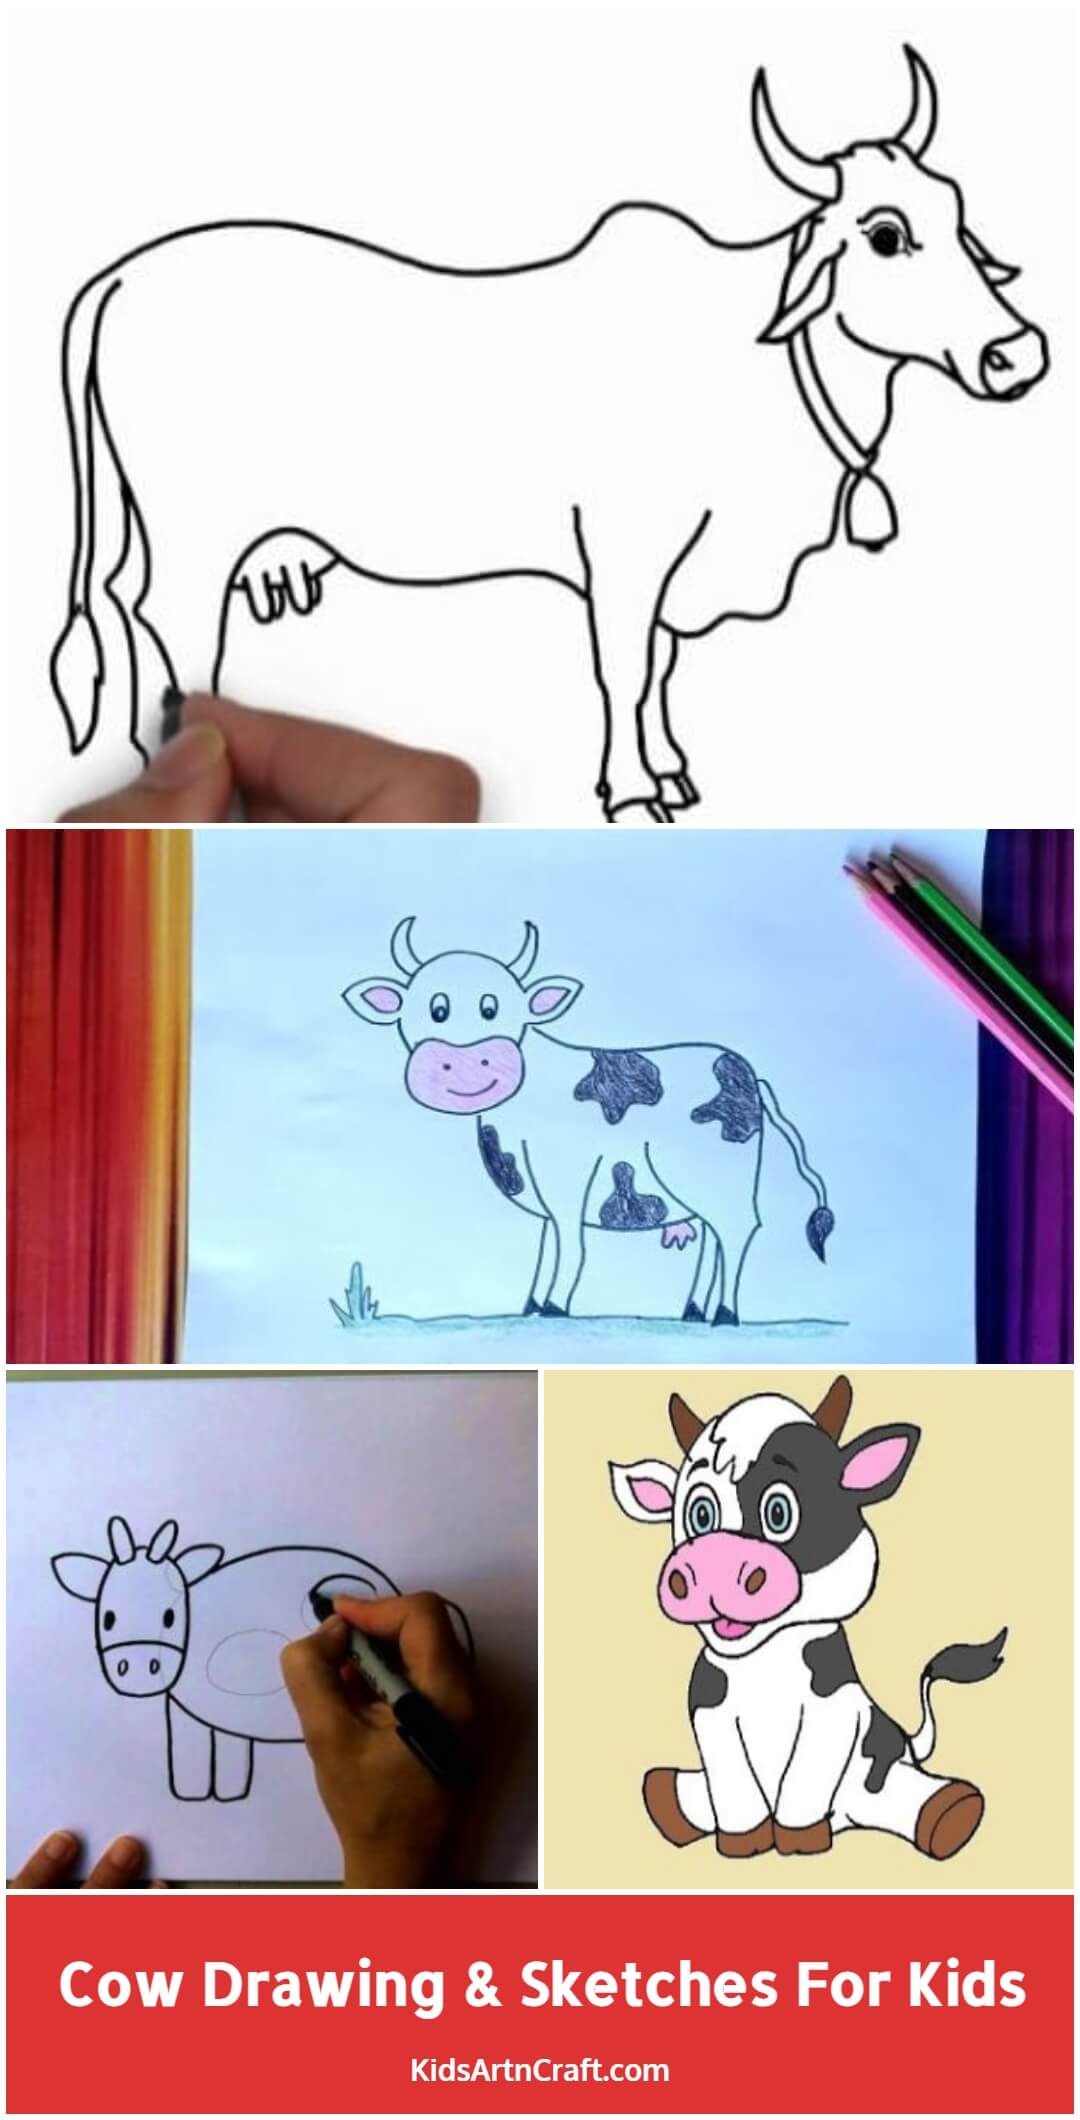 Cow Drawing & Sketches For Kids